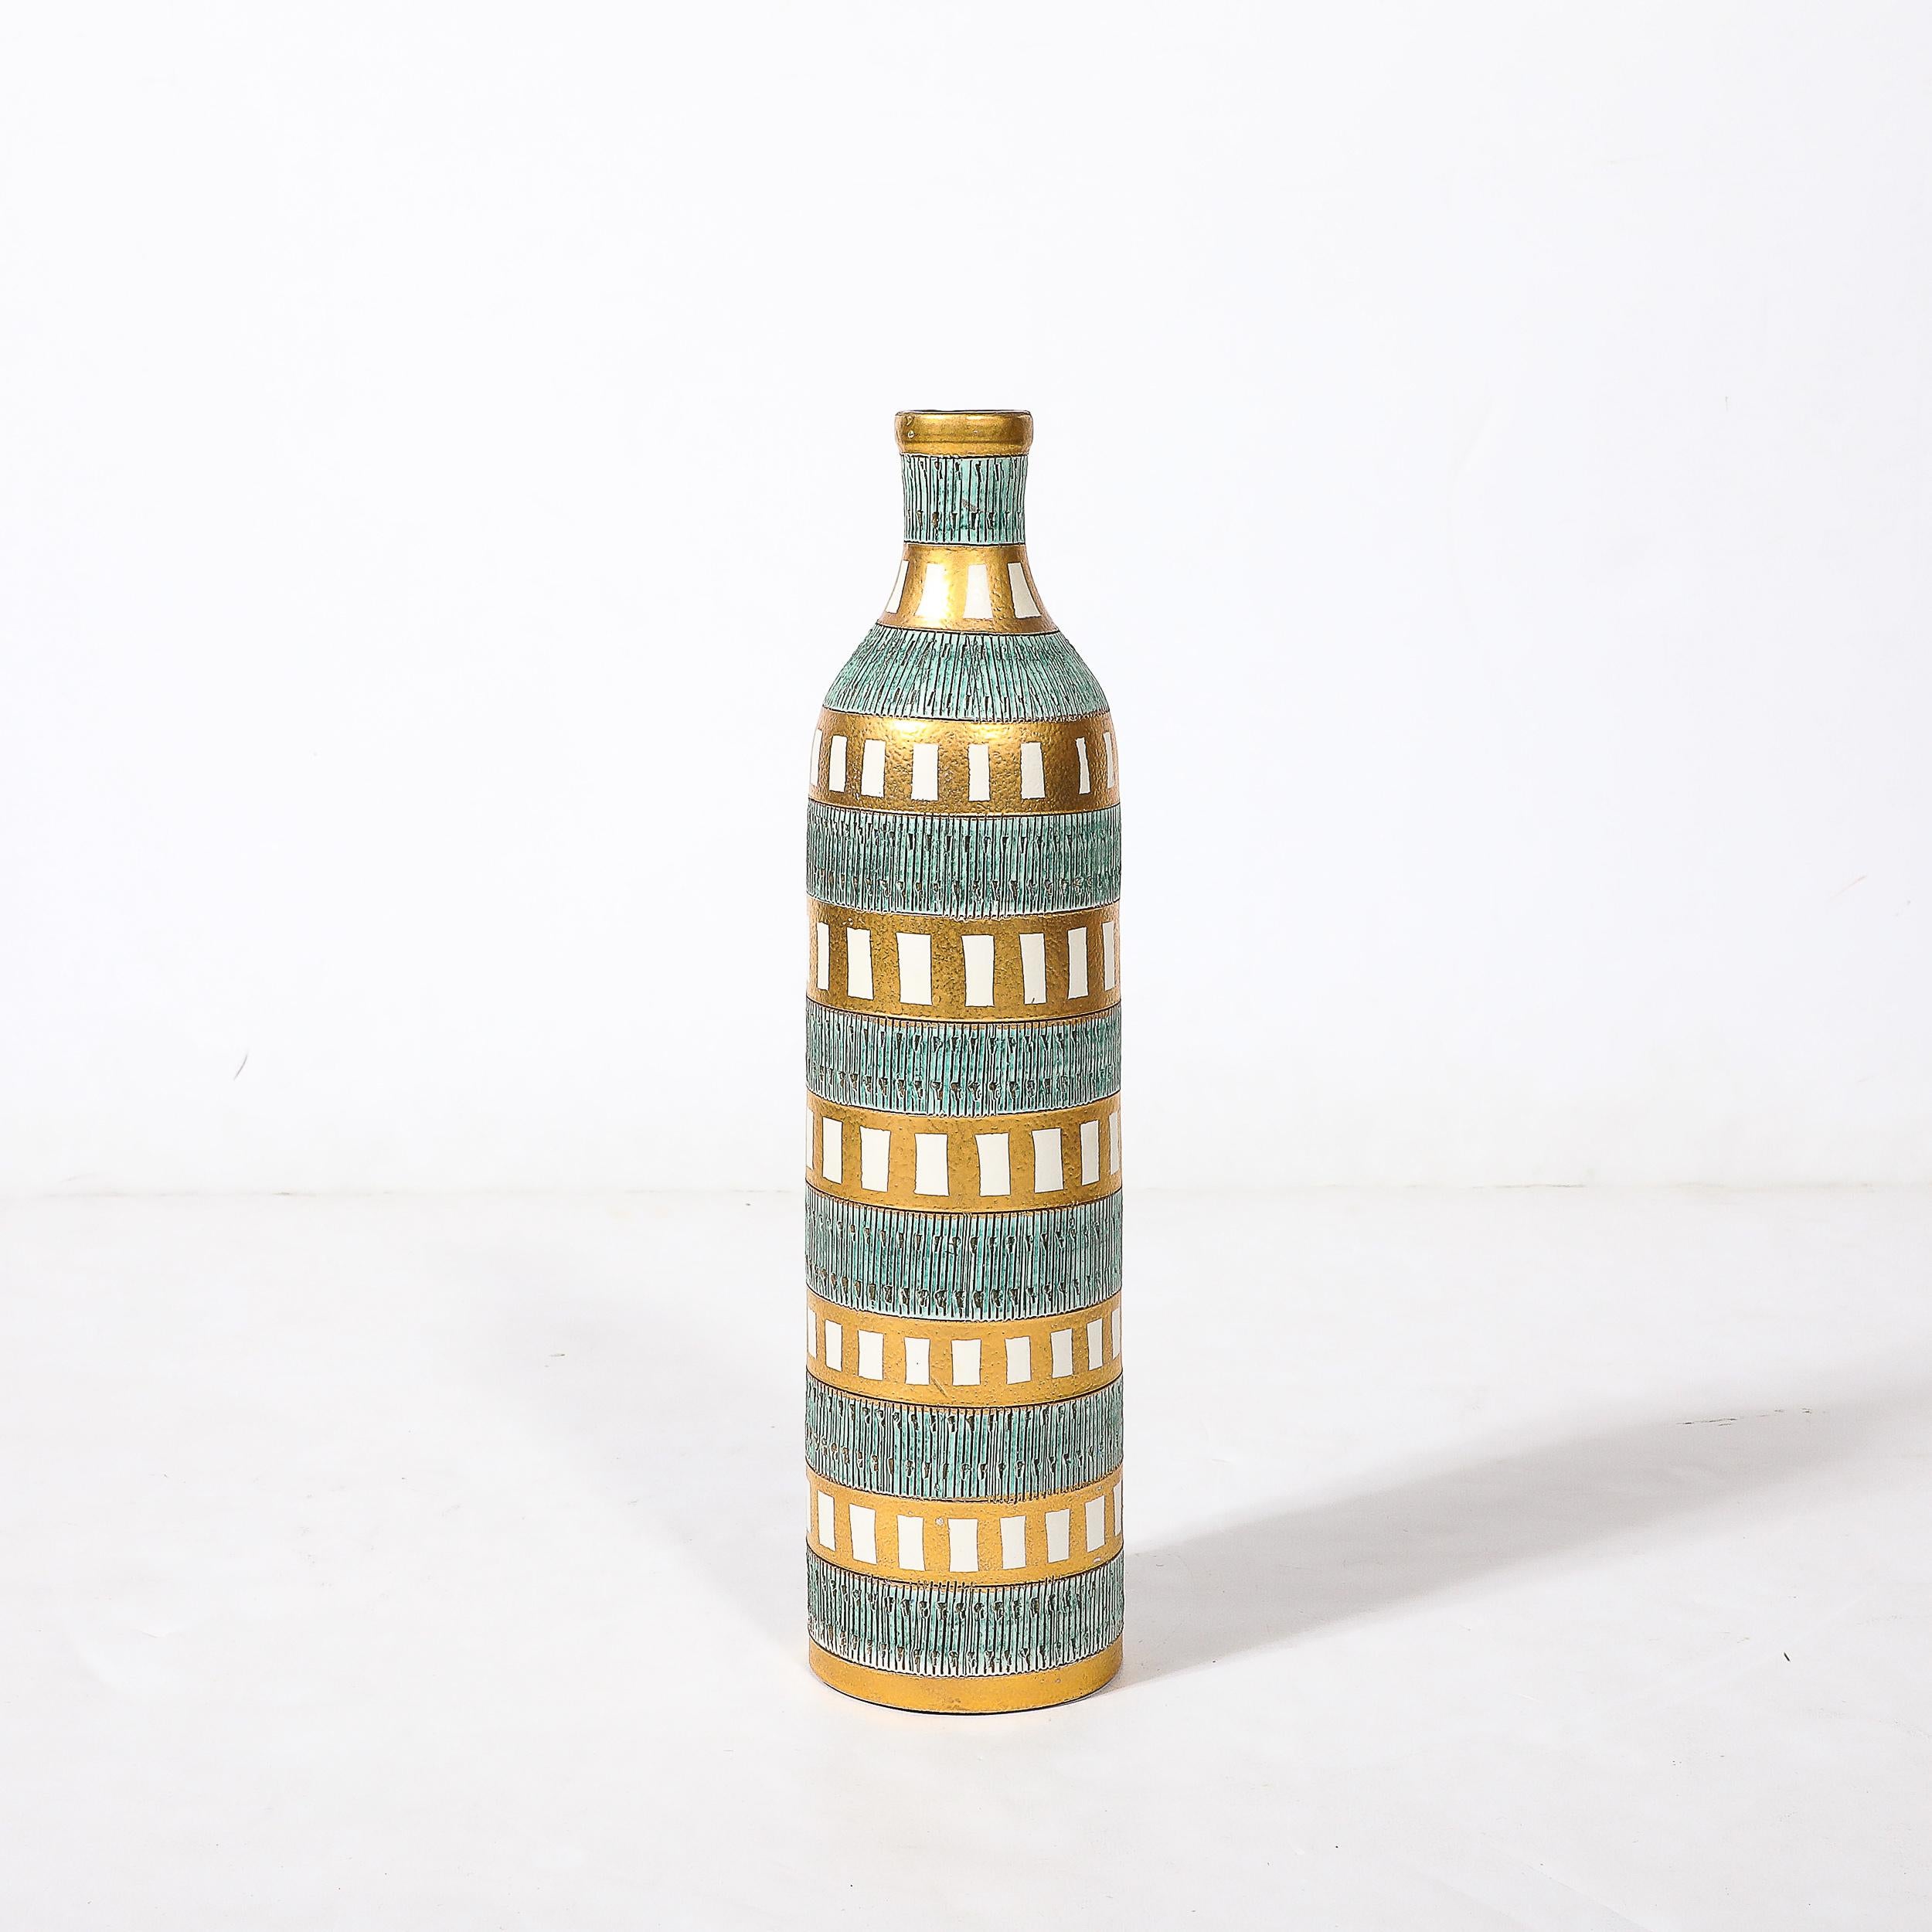 This beautiful and charming Mid-Century Modernist Bitossi Seta Ceramic Vase W/Geometric Banded Motifs in Turquoise and Gilt Glaze is by the esteemed ceramicist Aldo Londi and originates from Italy, Circa 1950. Features stunning banded motif with